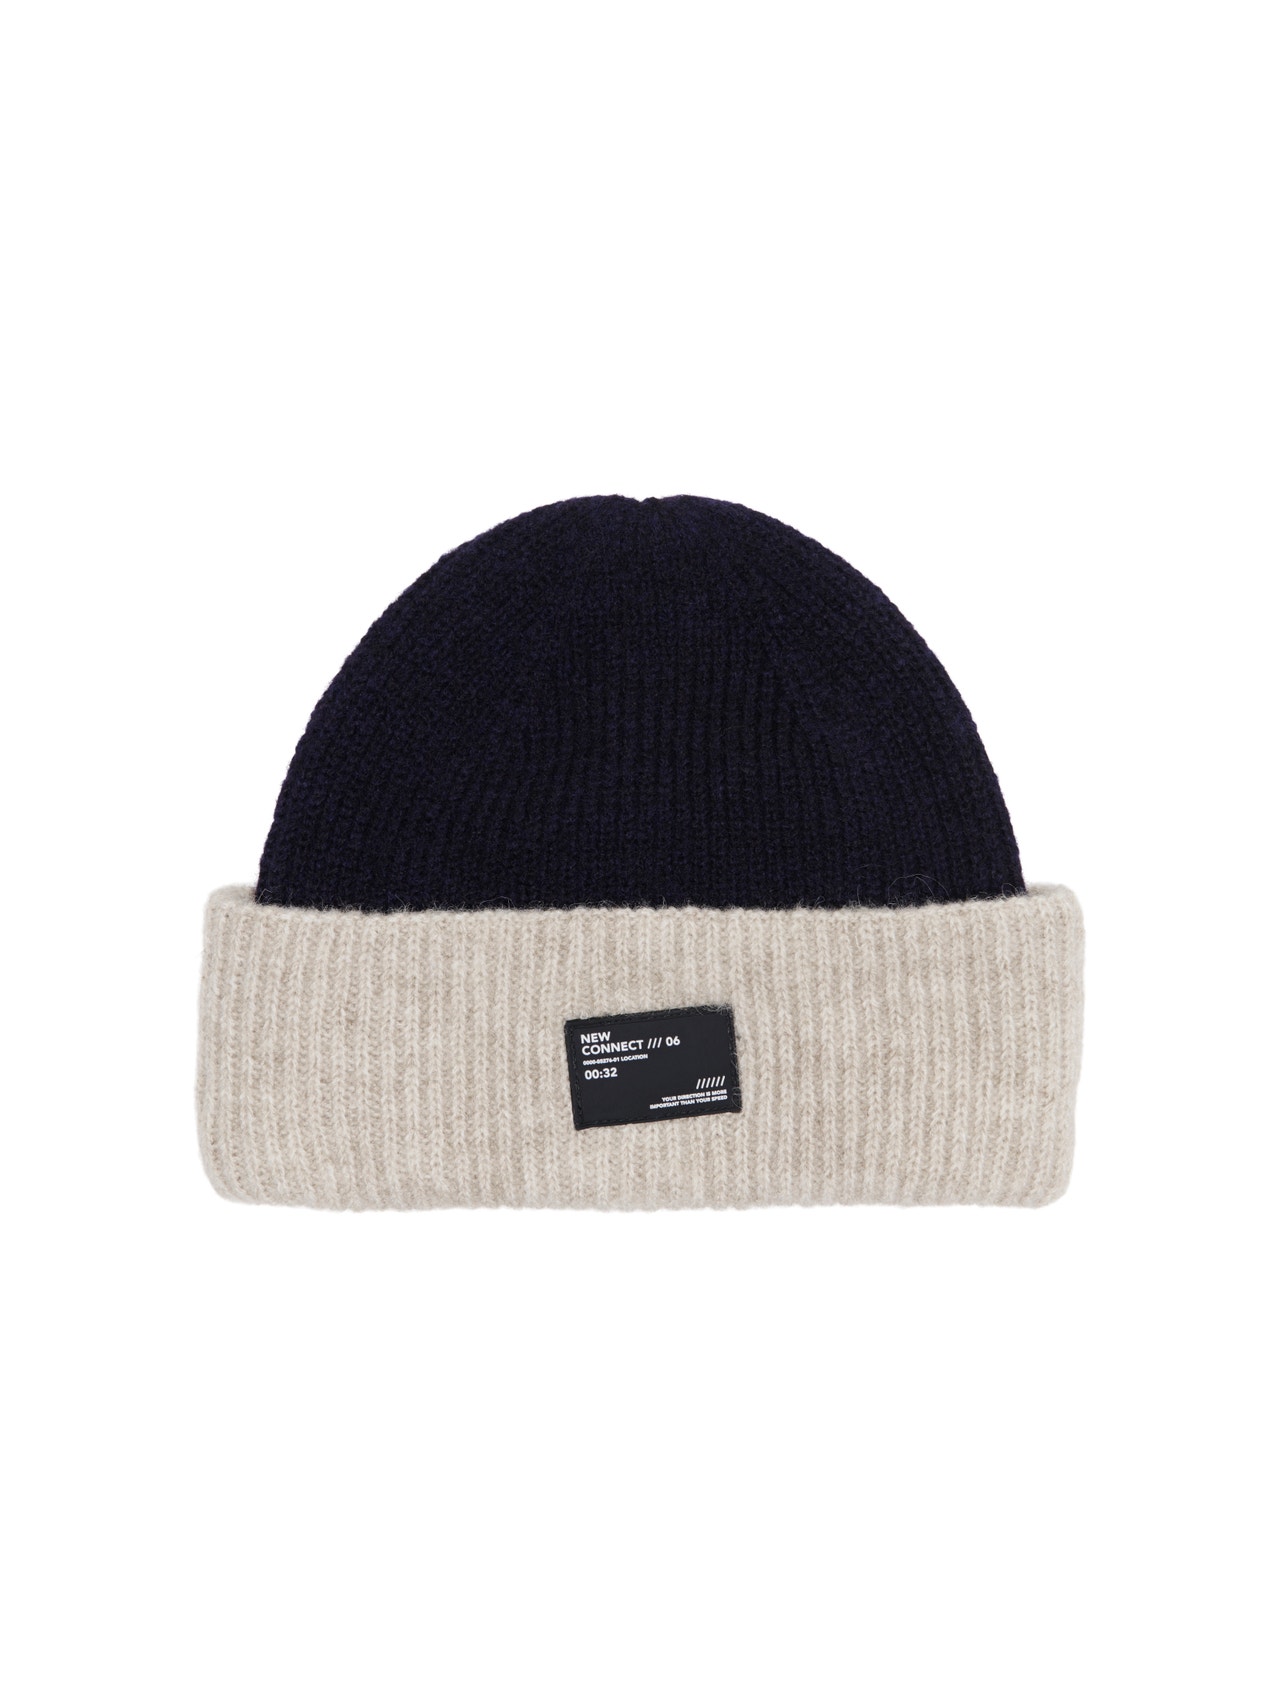 ONLY Beanie -Peacoat - 15300572